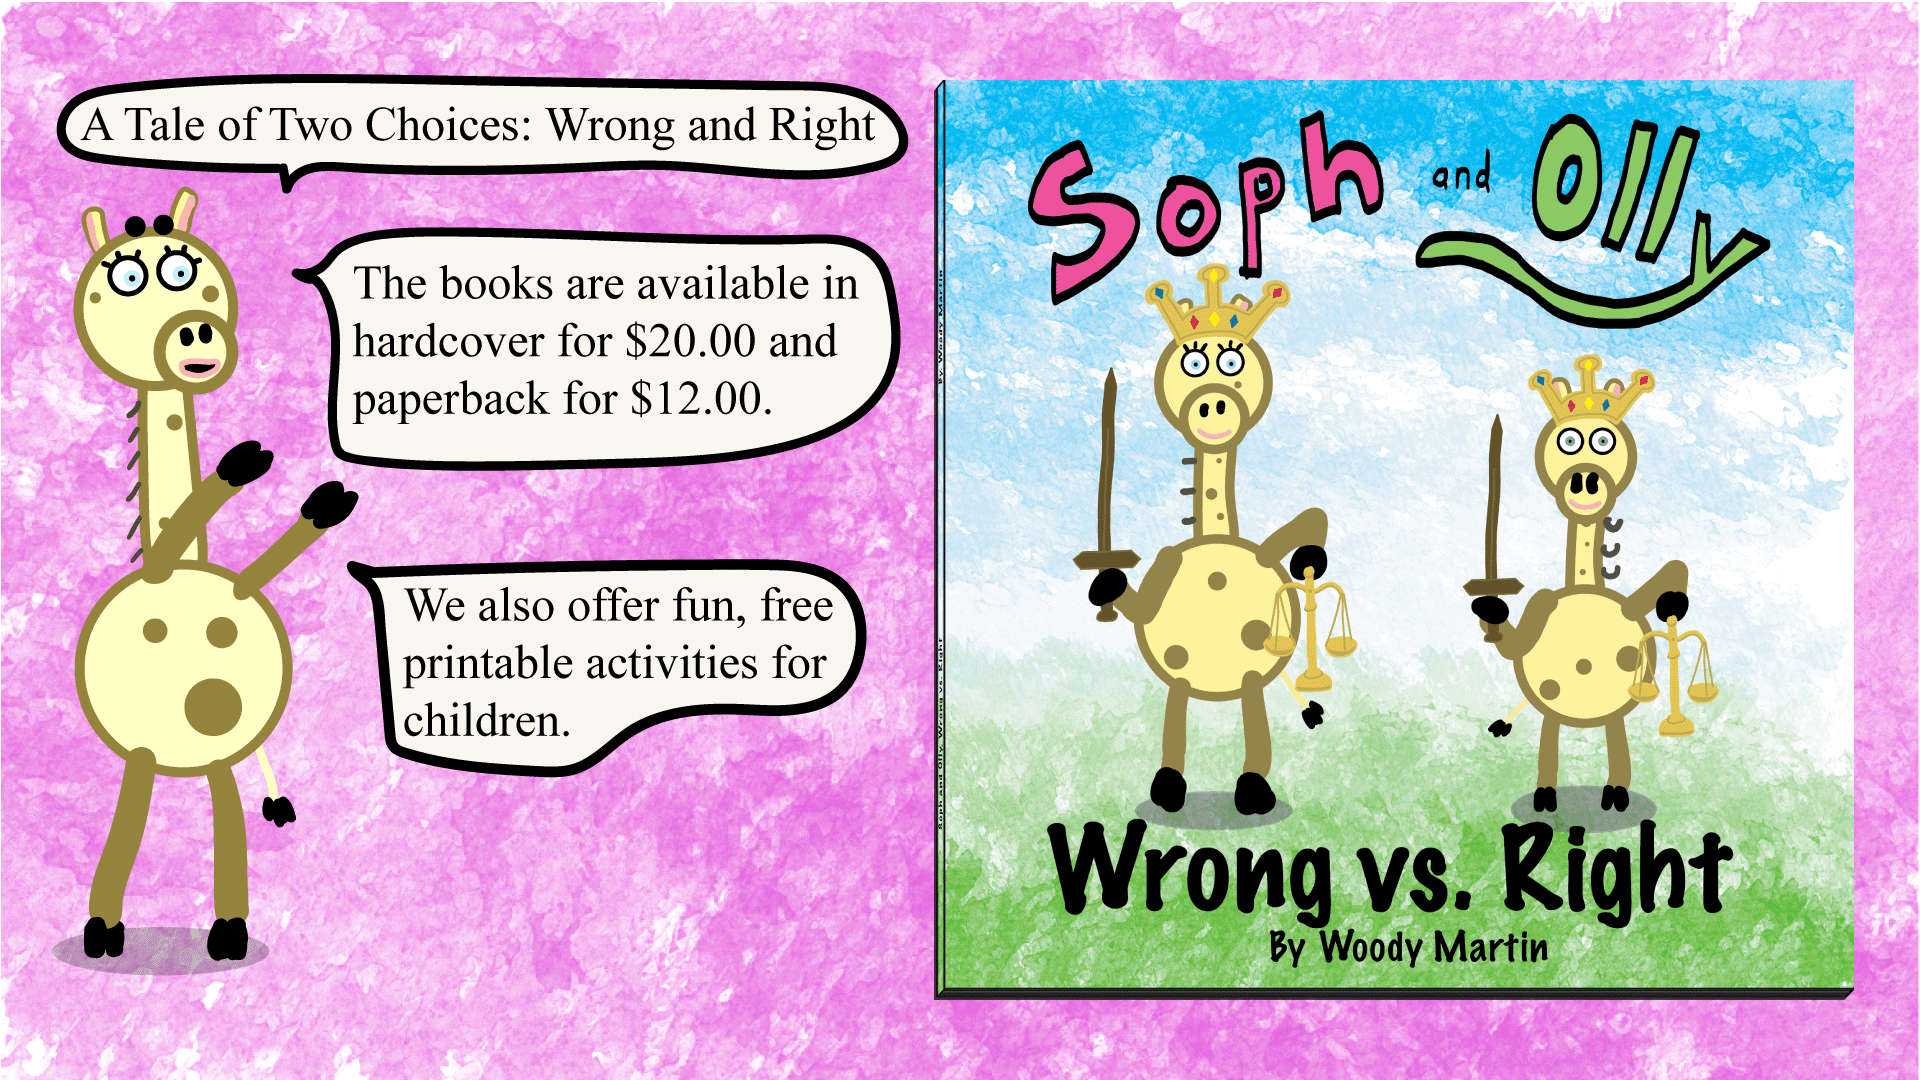 A Tale of Two Choices: Wrong and Right.  The books are available in hardcover for $20.00 and paperback for $12.00.  We also offer fun, free printable activities for children.